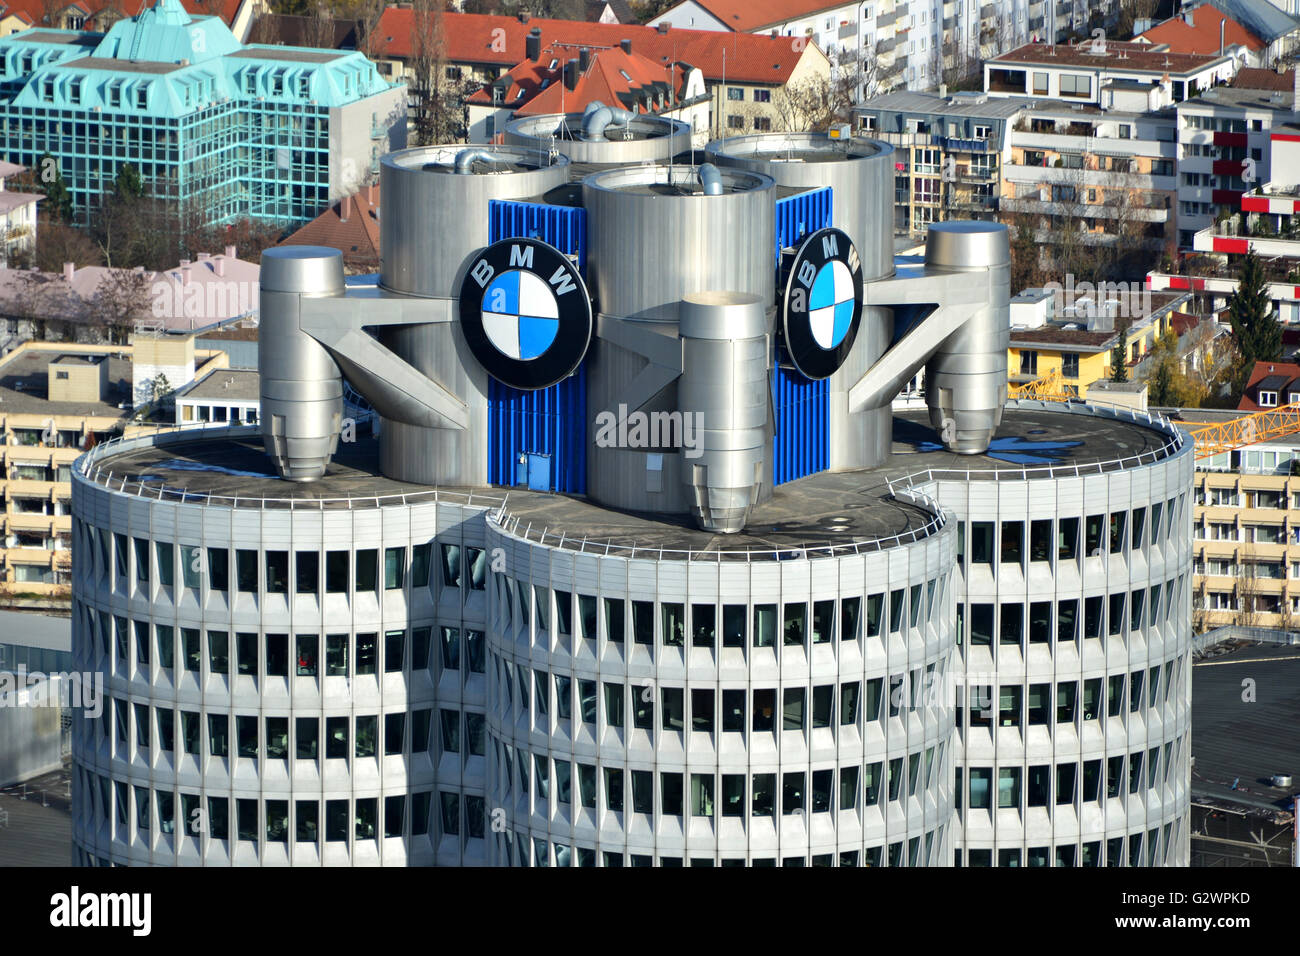 14.11.2015, Munich, Bavaria, Germany - Look at the BMW Tower. 0HD160104D040CAROEX.JPG - NOT for SALE in G E R M A N Y, A U S T R I A, S W I T Z E R L A N D [MODEL RELEASE: NOT APPLICABLE, PROPERTY RELEASE: NO, (c) caro photo agency / Dittrich, http://www.caro-images.com, info@carofoto.pl - Any use of this picture is subject to royalty!] Stock Photo